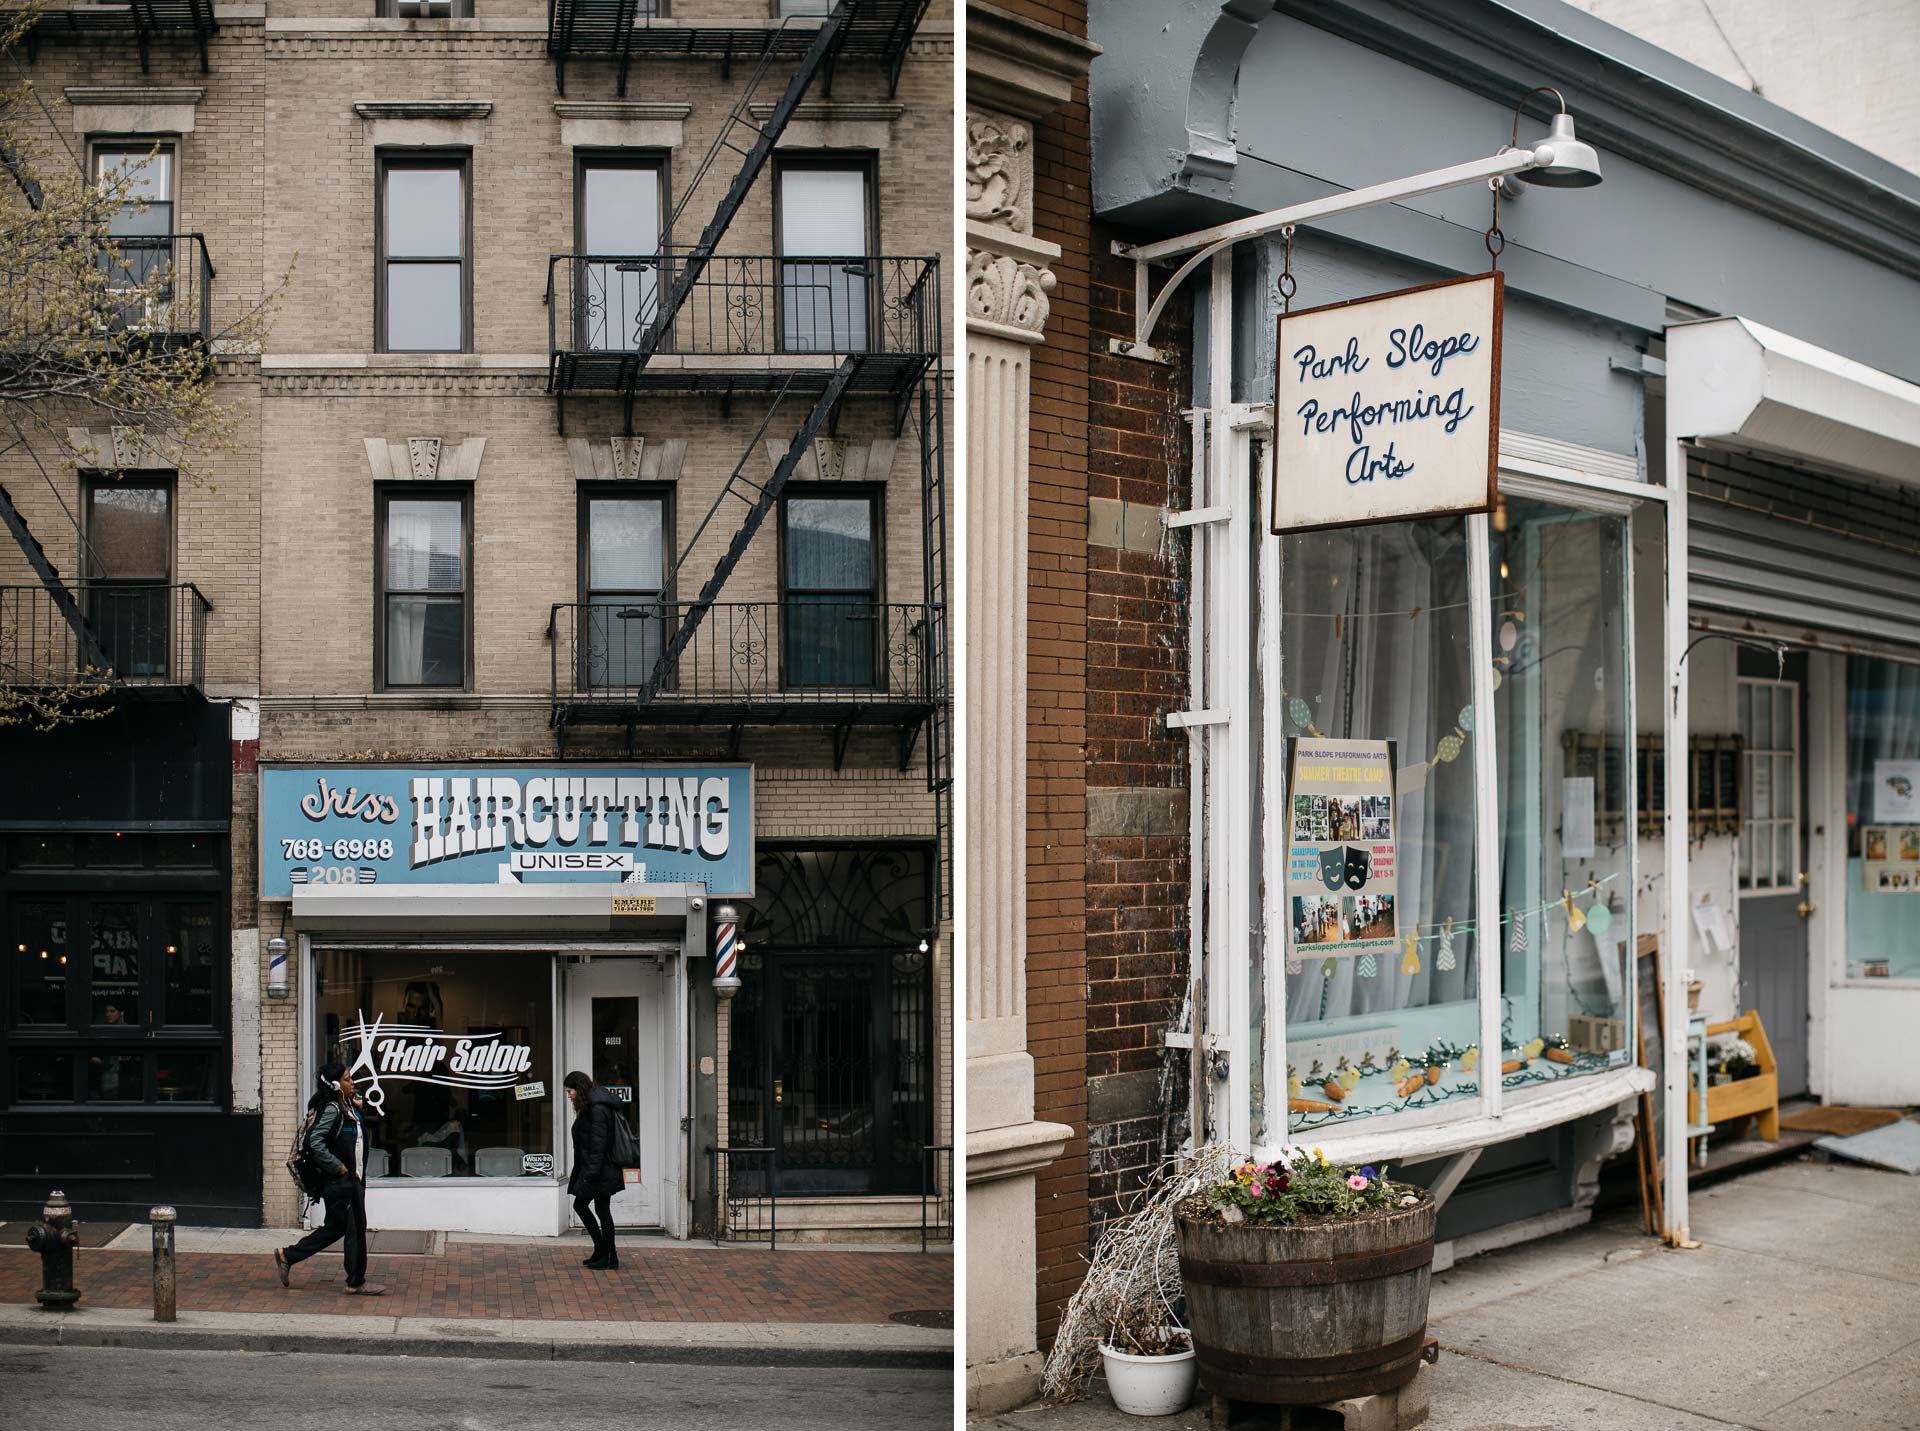 Engagement Session in Brooklyn by Jean-Laurent Gaudy Photography